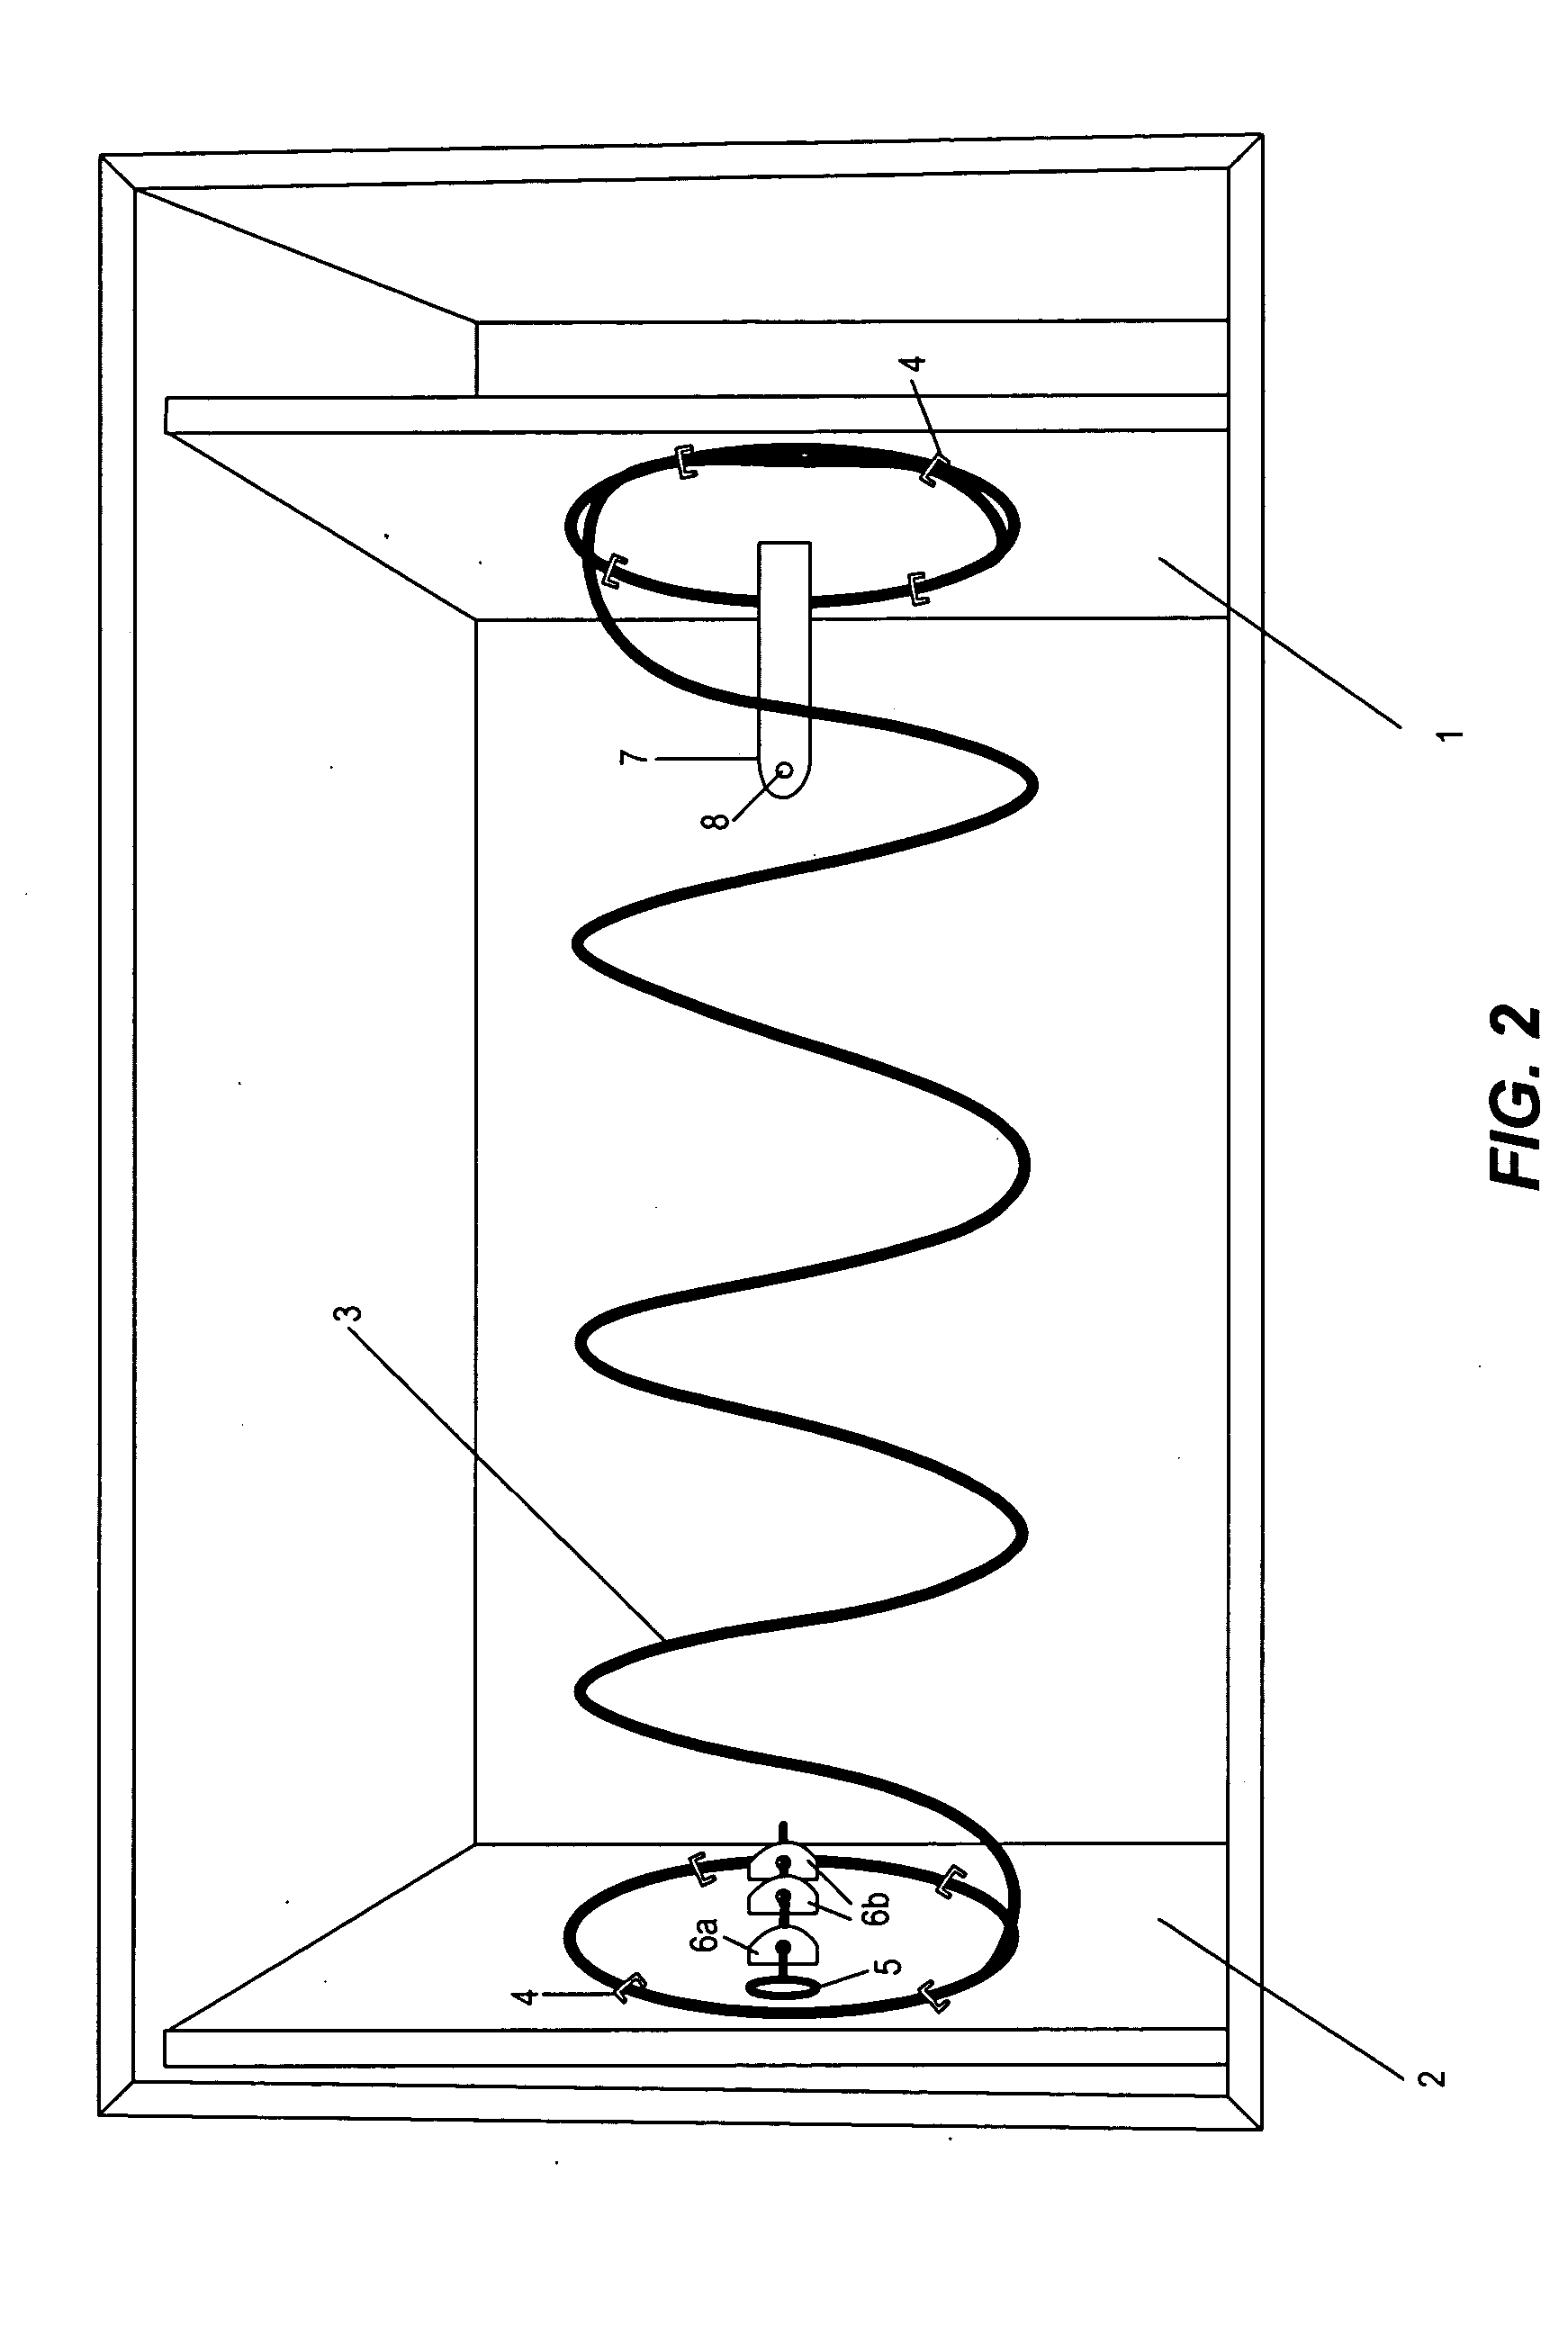 Retention device for storage of documents and objects